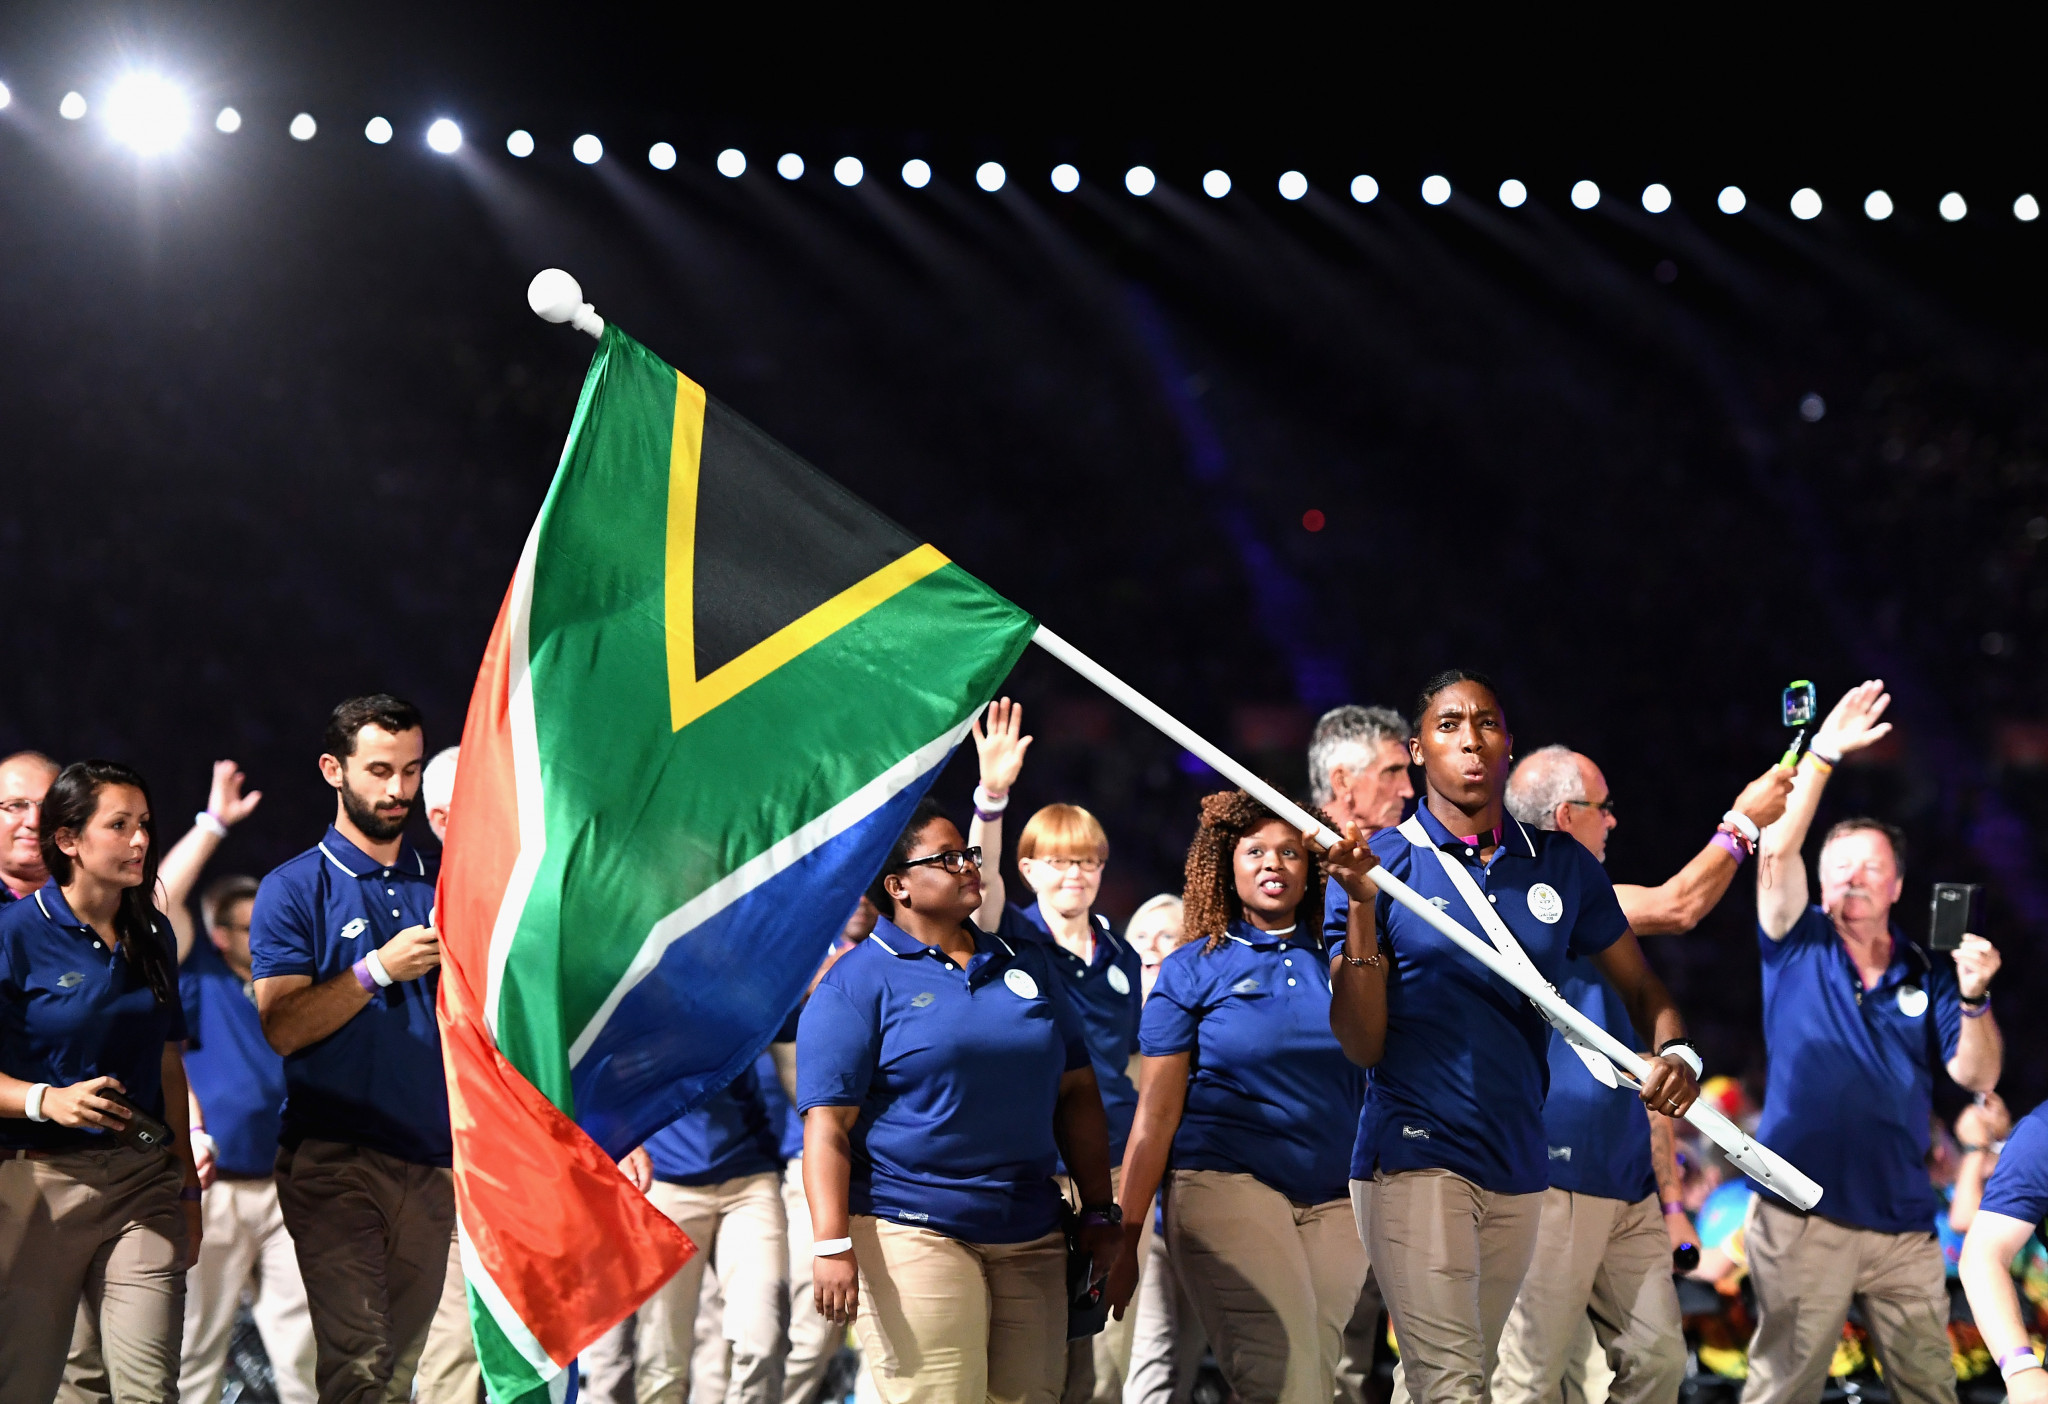 Netballer Msomi, Para swimmer Sadie to carry South Africa flag at Birmingham 2022 Opening Ceremony